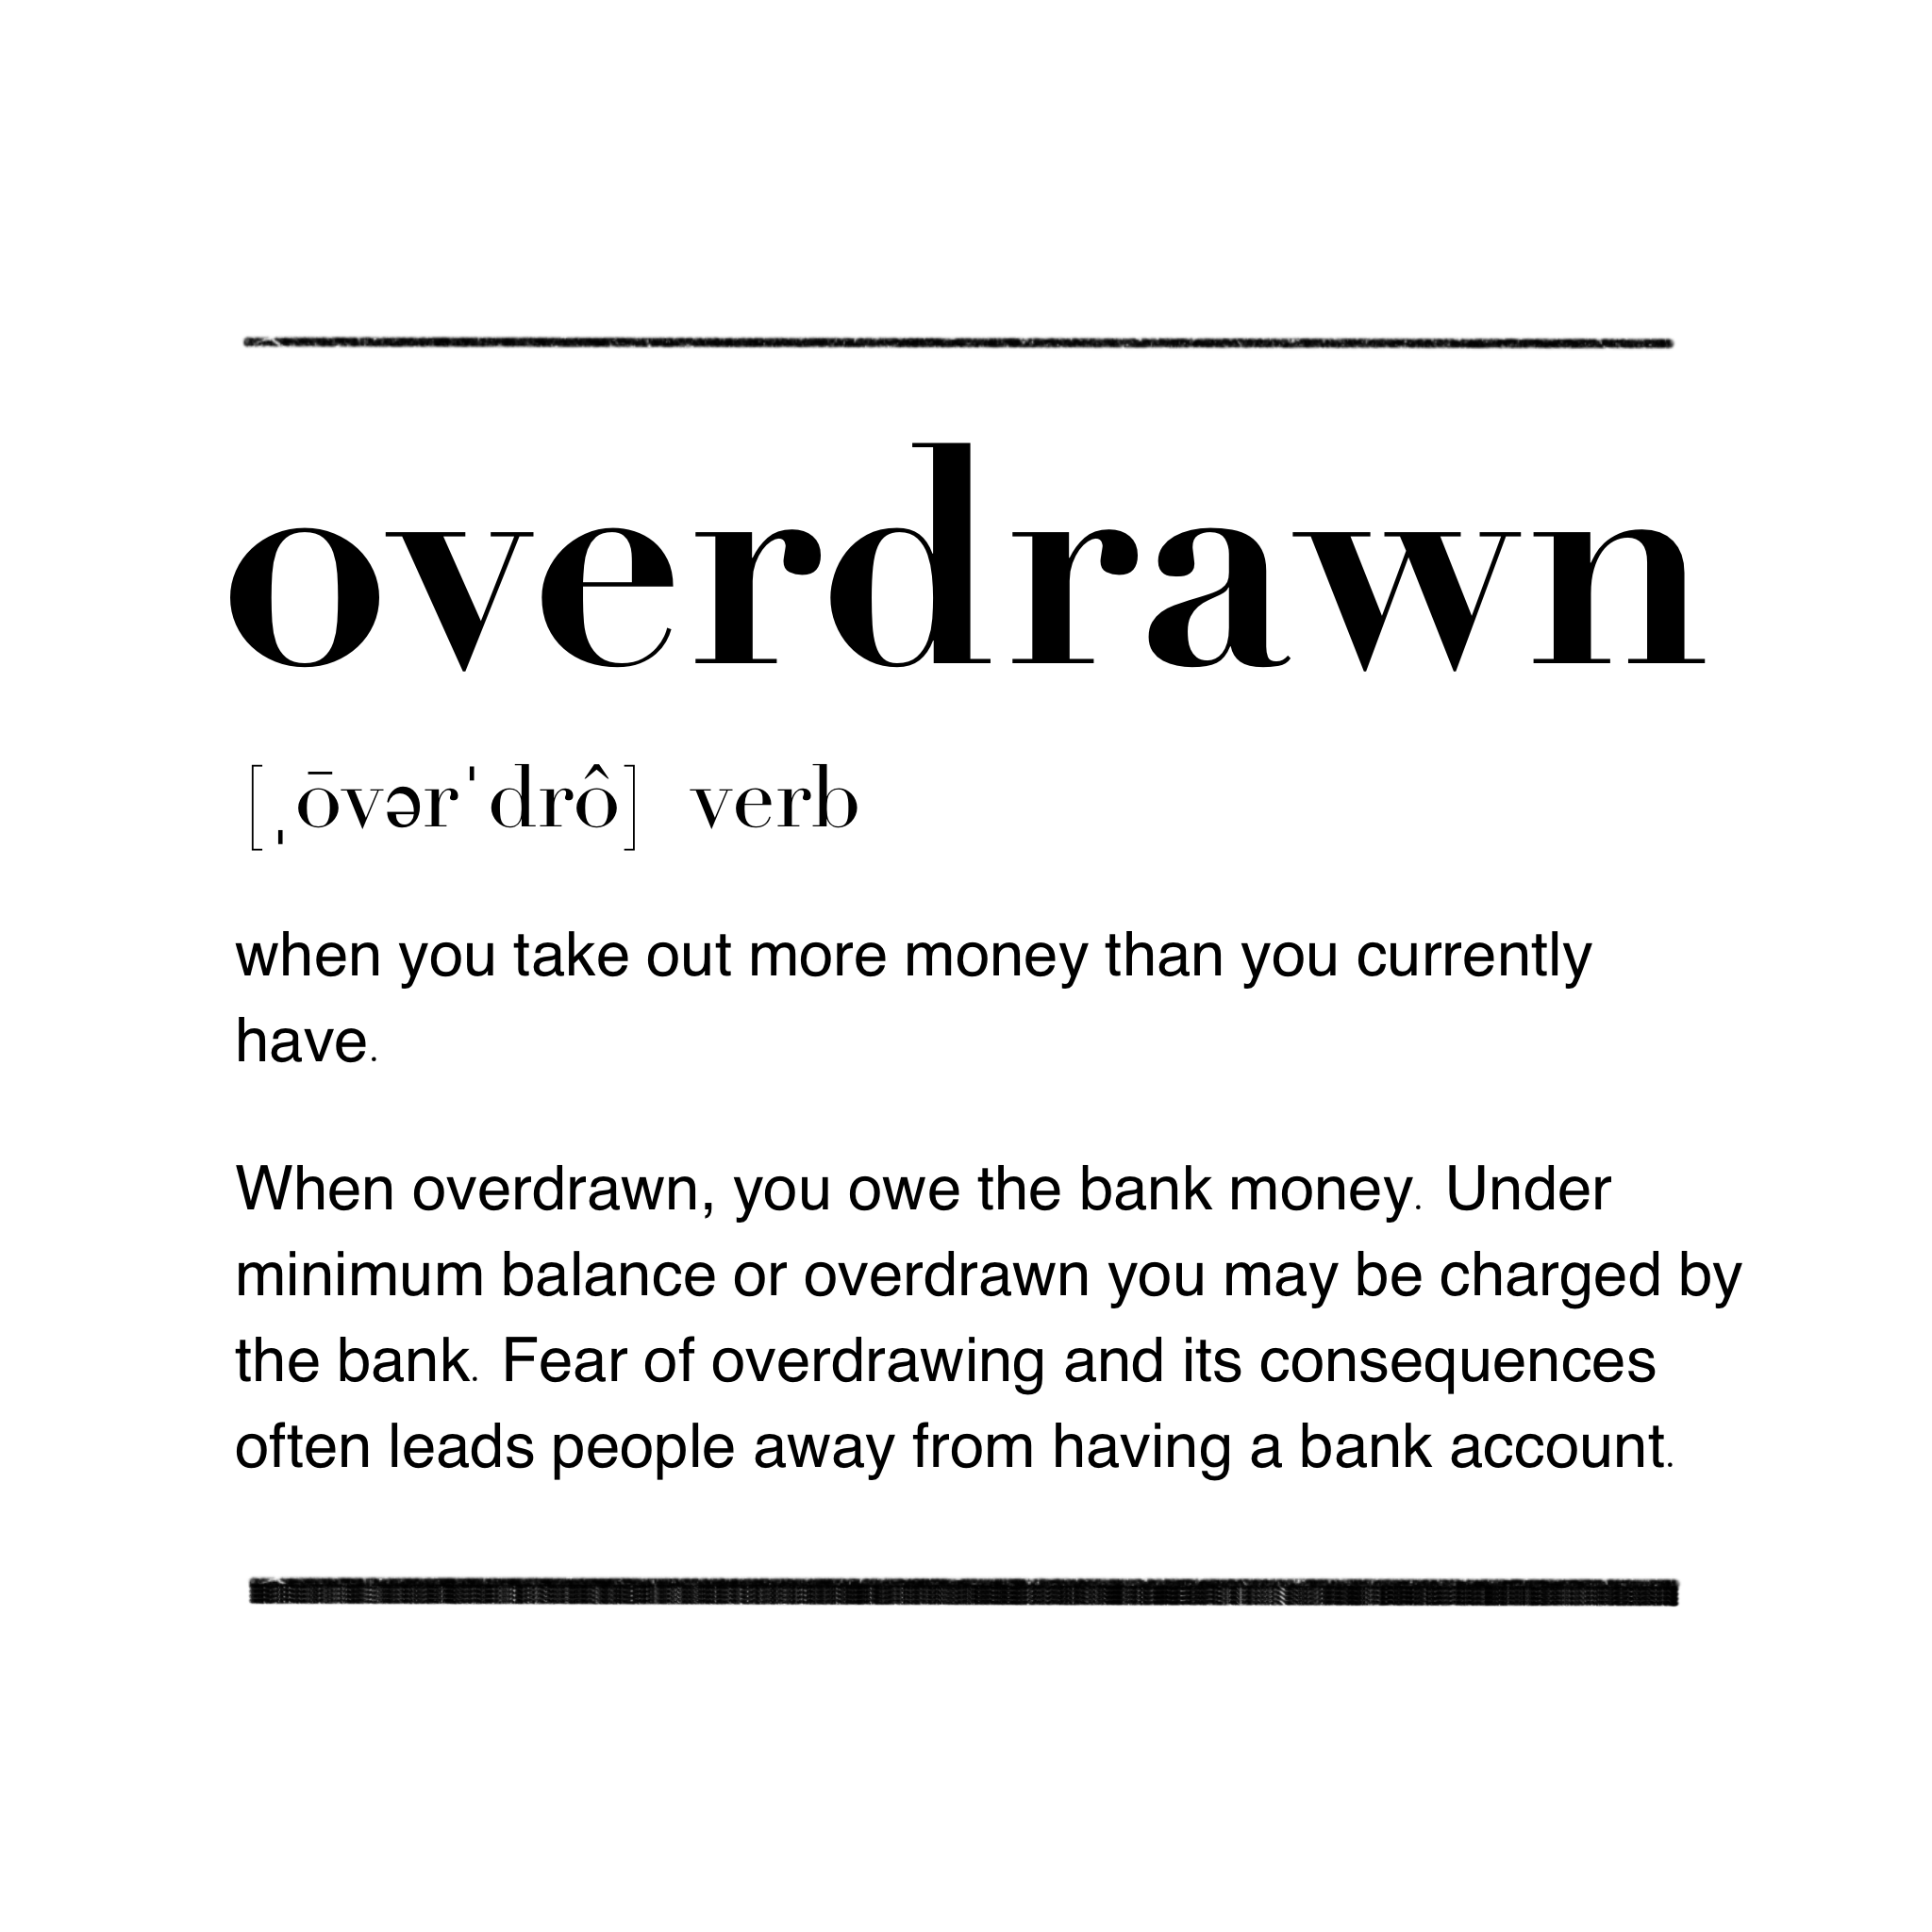 One of the fears some unbanked people may have is being overdrawn. The average minimum balance in a bank is around $300-500. The typical overdraft fee is $35 according to Investopedia 2023.